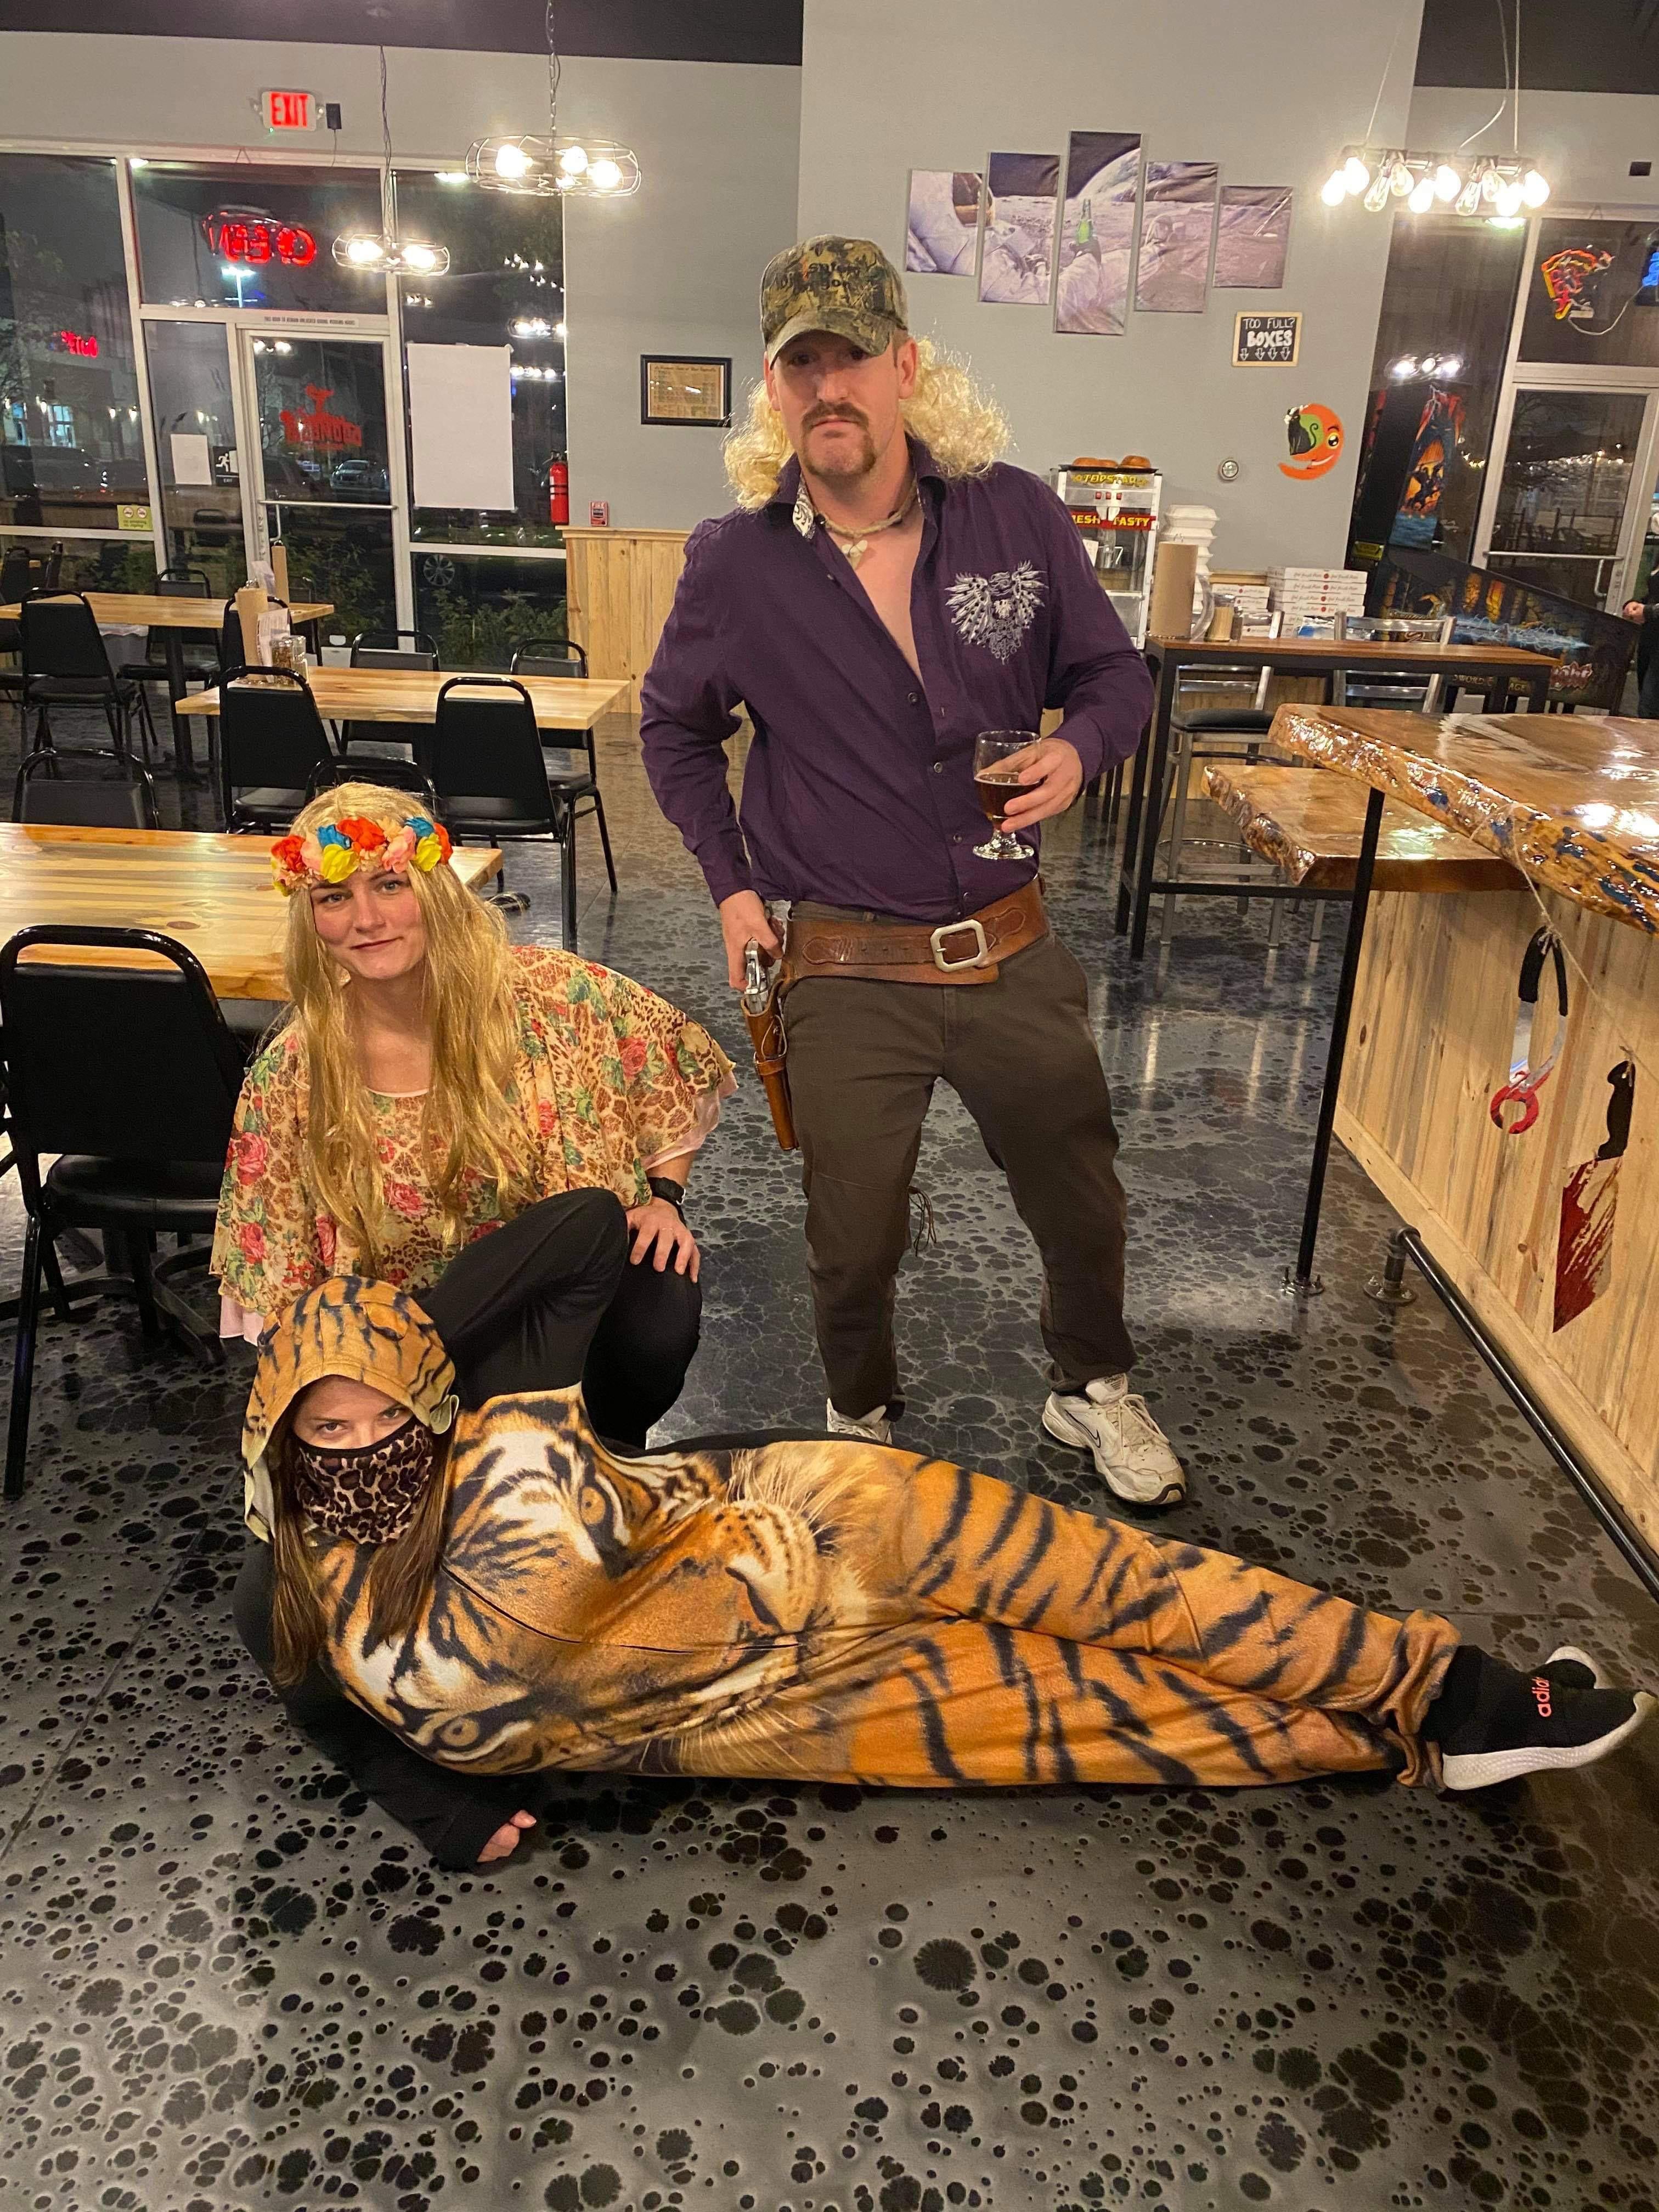 I was working in my tiger onesie on Halloween when customers came in as Joe Exotic and Carole Baskin.